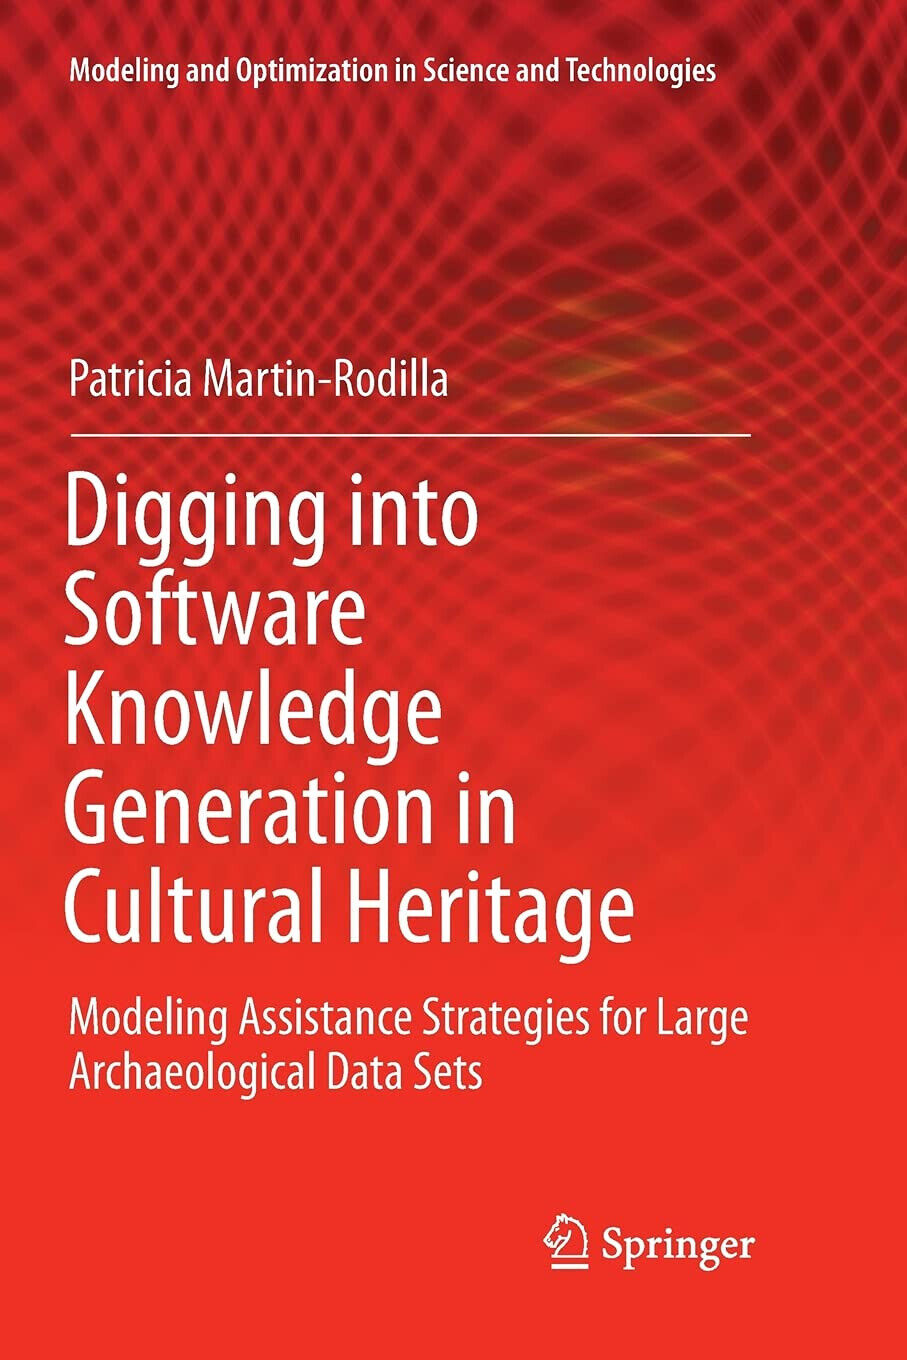 Digging into Software Knowledge Generation in Cultural Heritage - 2018